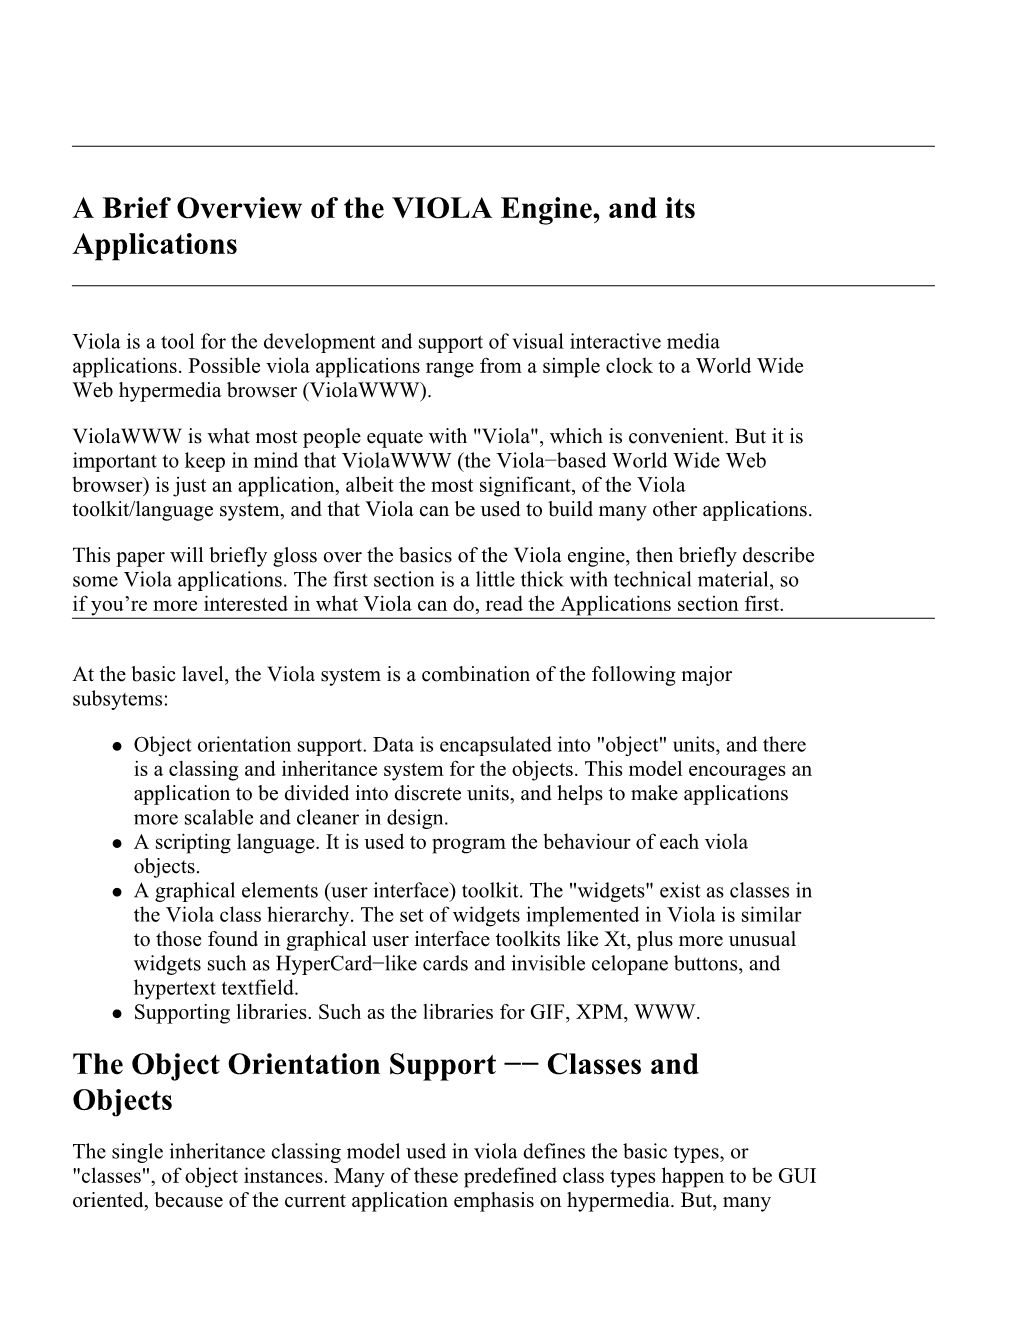 VIOLA Engine, and Its Applications